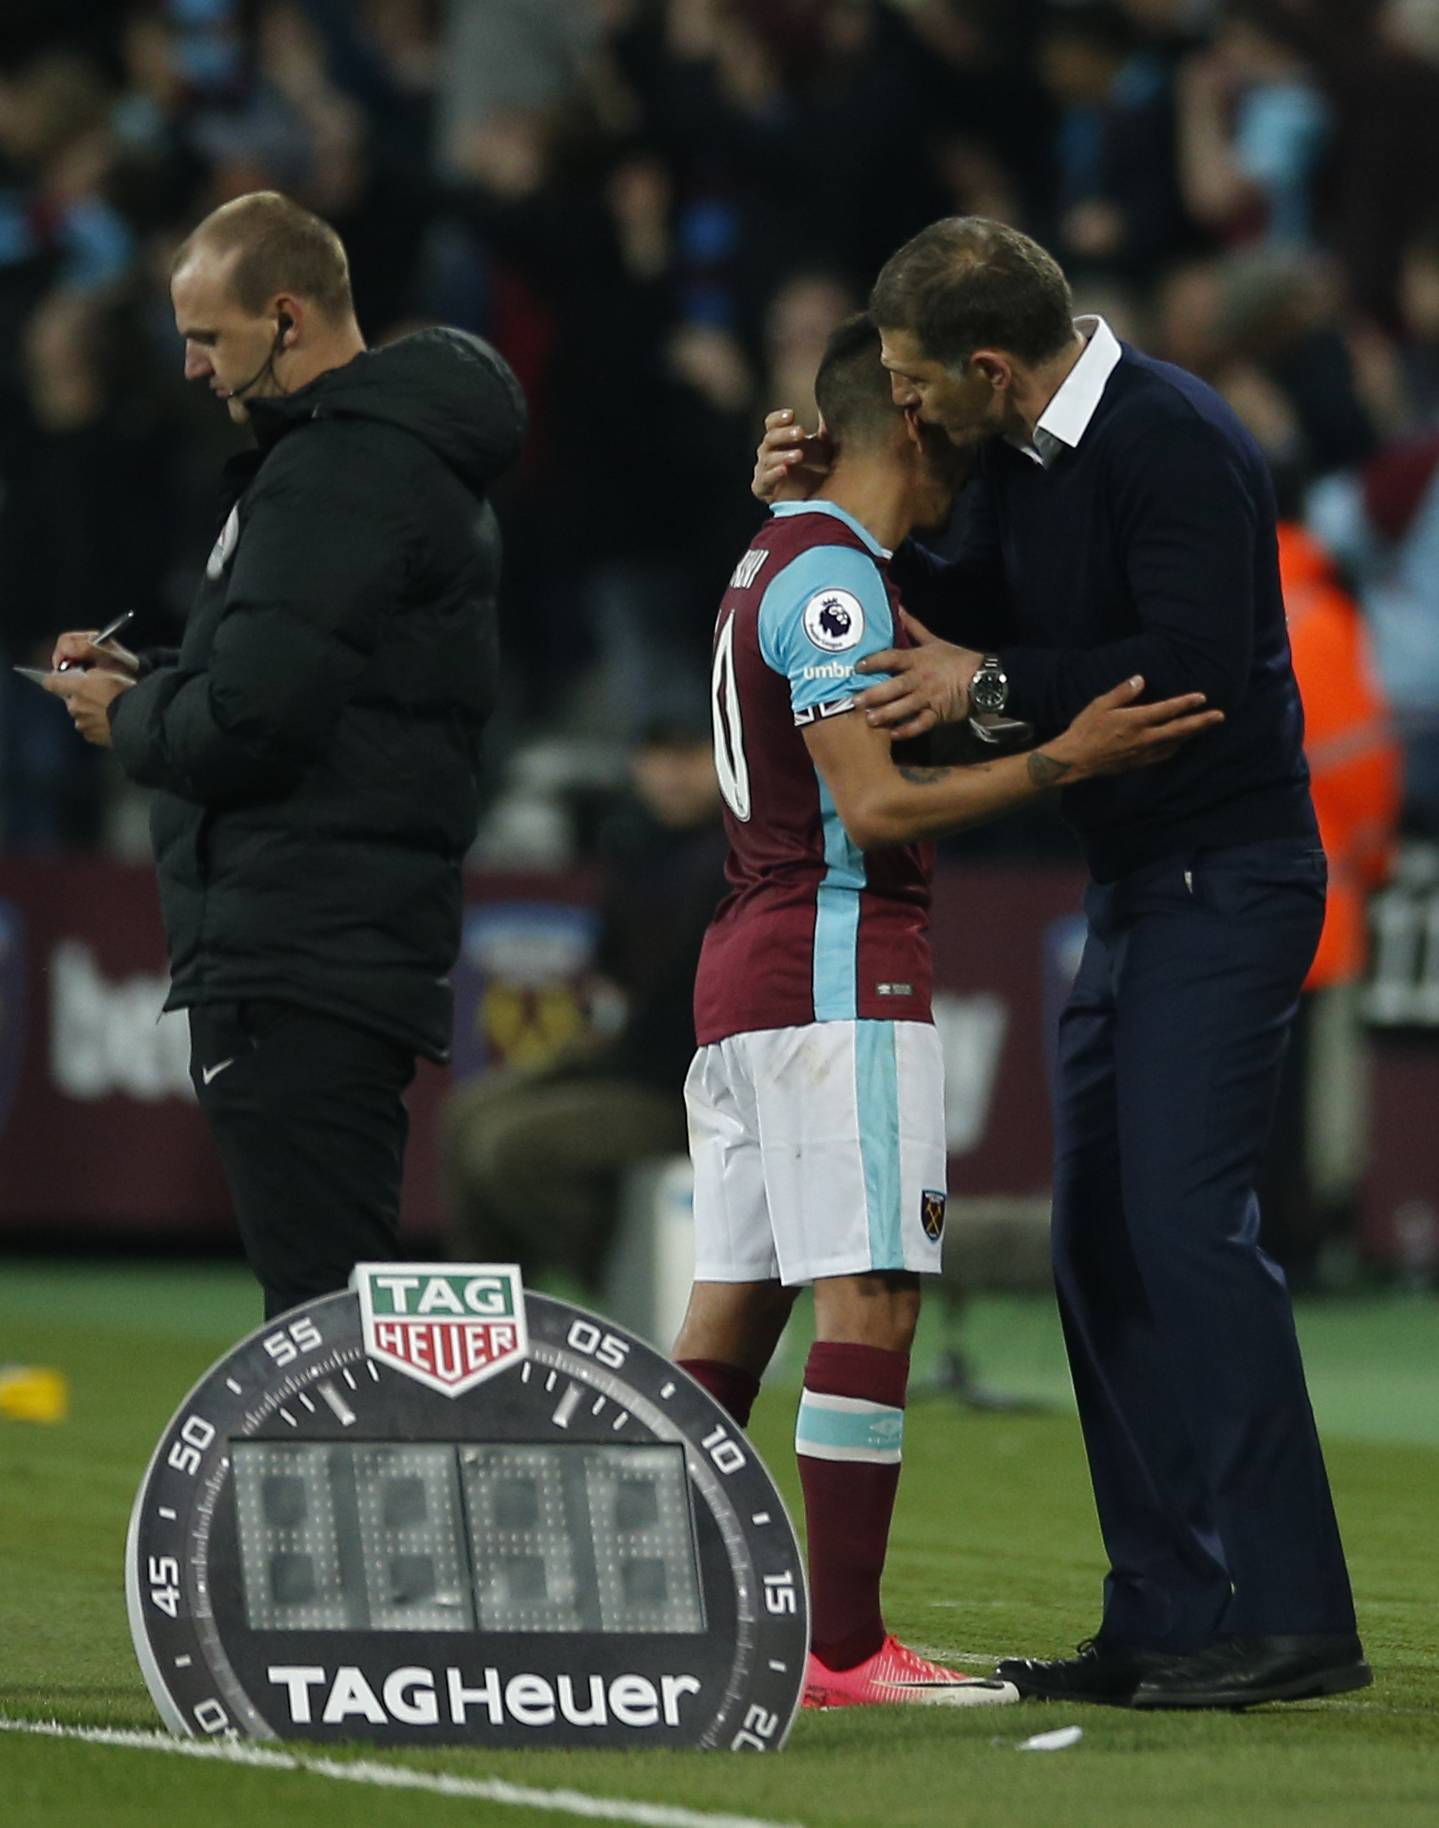 West Ham United's Manuel Lanzini with West Ham United manager Slaven Bilic after being substituted